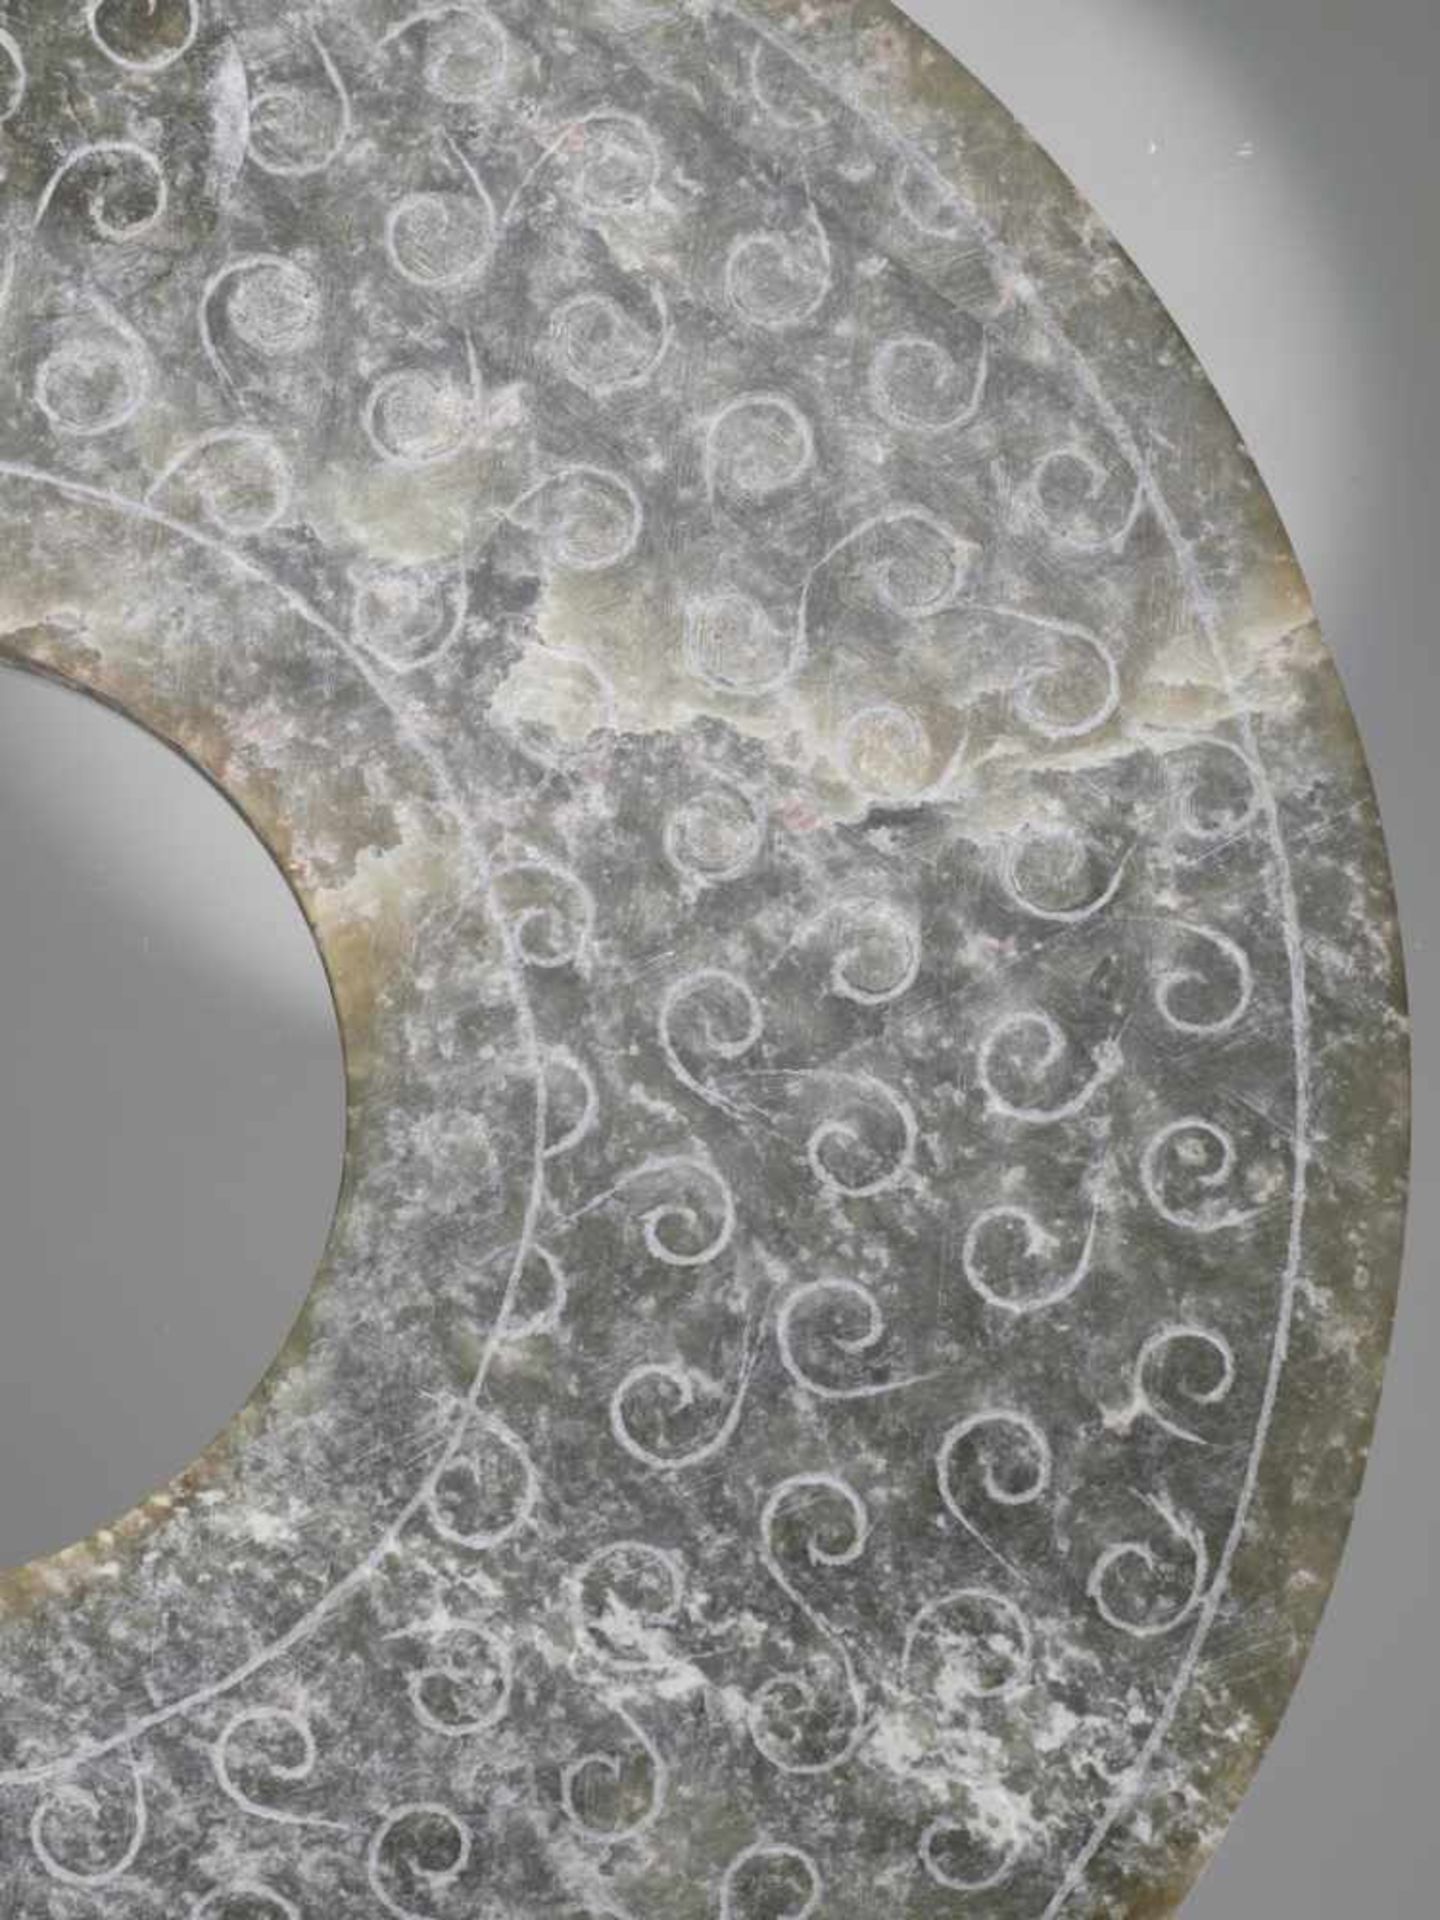 A REFINED CHARCOAL GREY DISC WITH ENGRAVED CURLS Jade. China, Han Dynasty, 2nd century BC 穀紋玉璧 - 漢代, - Image 6 of 8